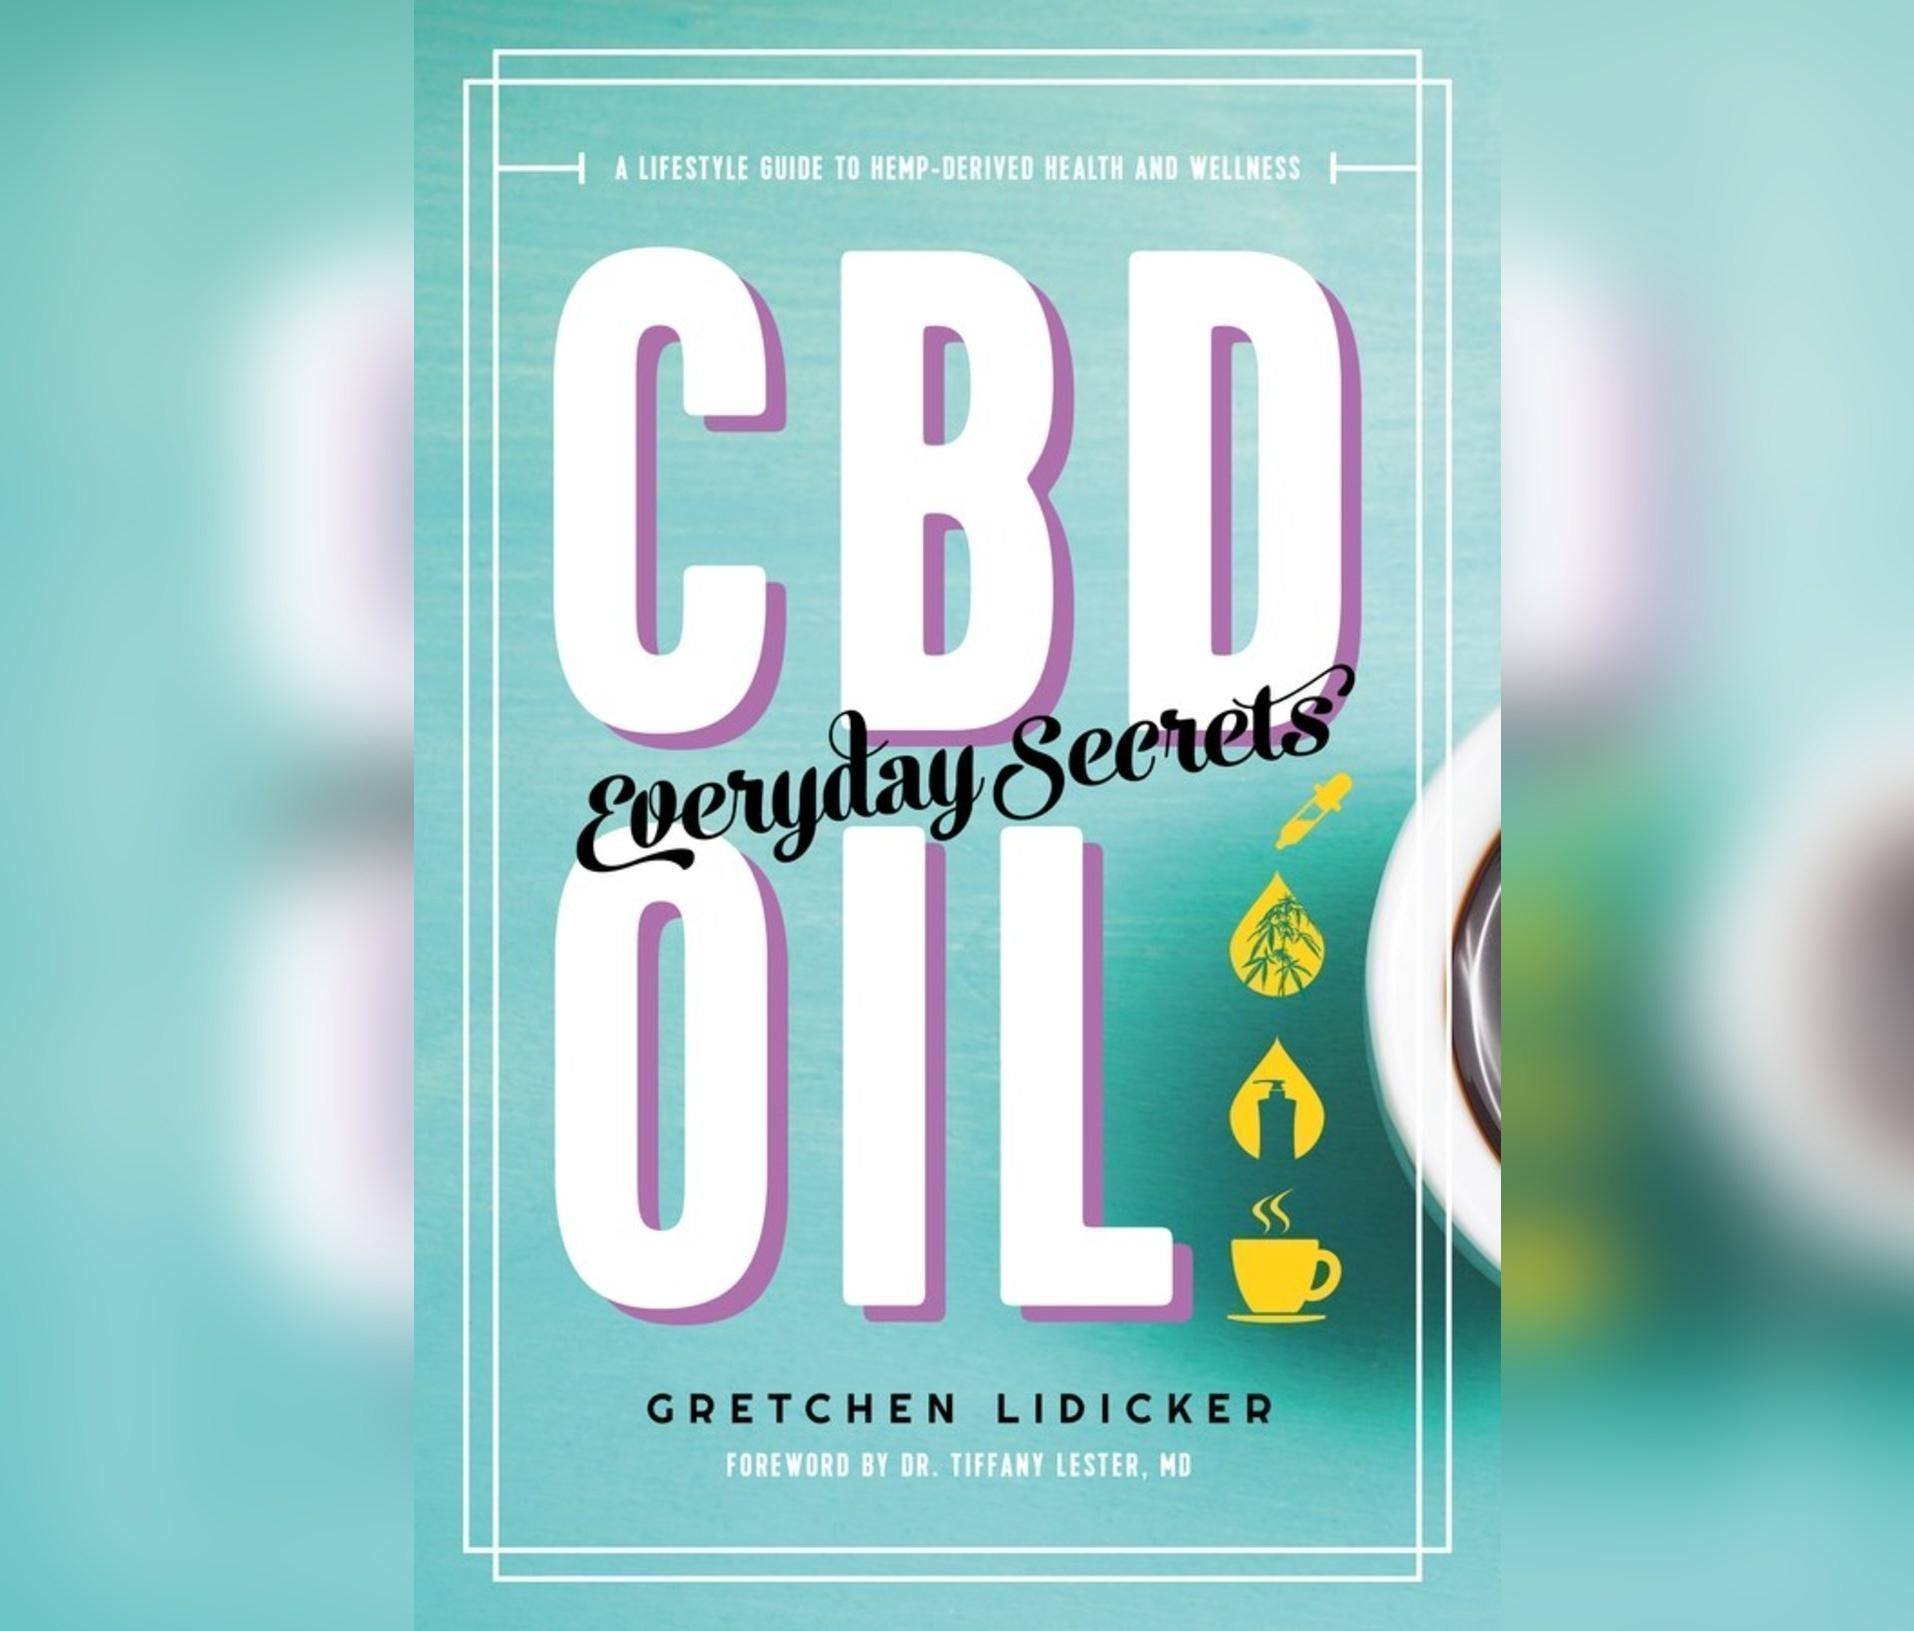 Coping the CBD as a wellness ally - Charliebirdy thirty minutes